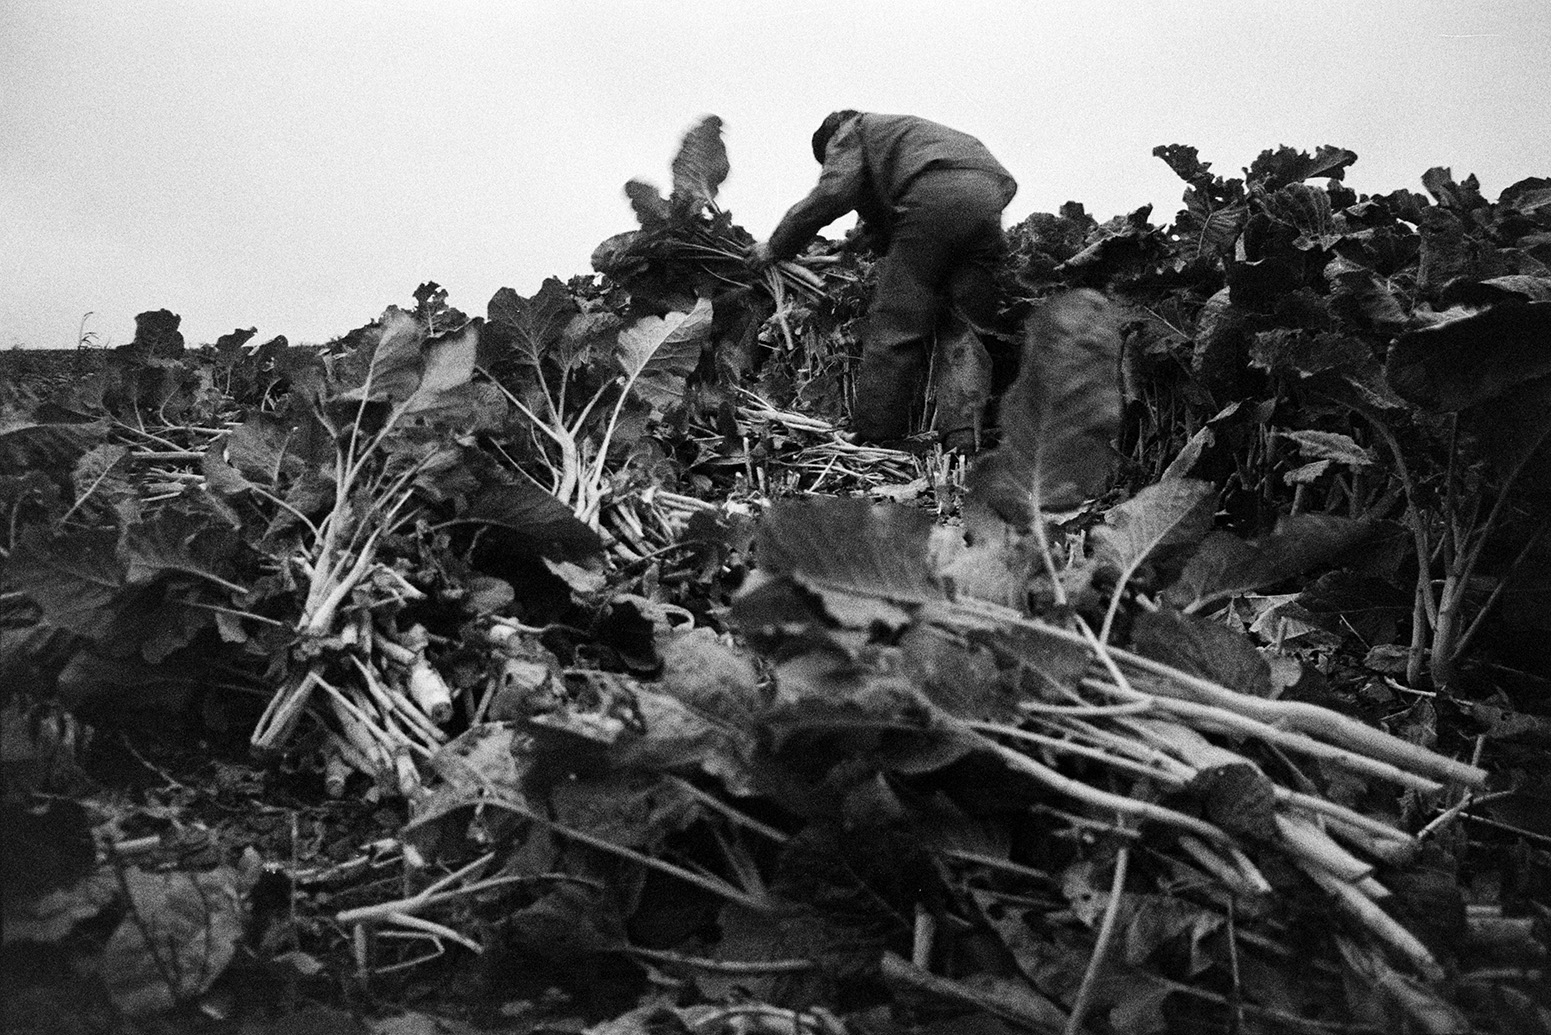 Ivor Bourne cutting kale for cattle feed, using a bill hook, in a field at Mill Road Farm, Beaford. The farm was also known as Jeffrys.